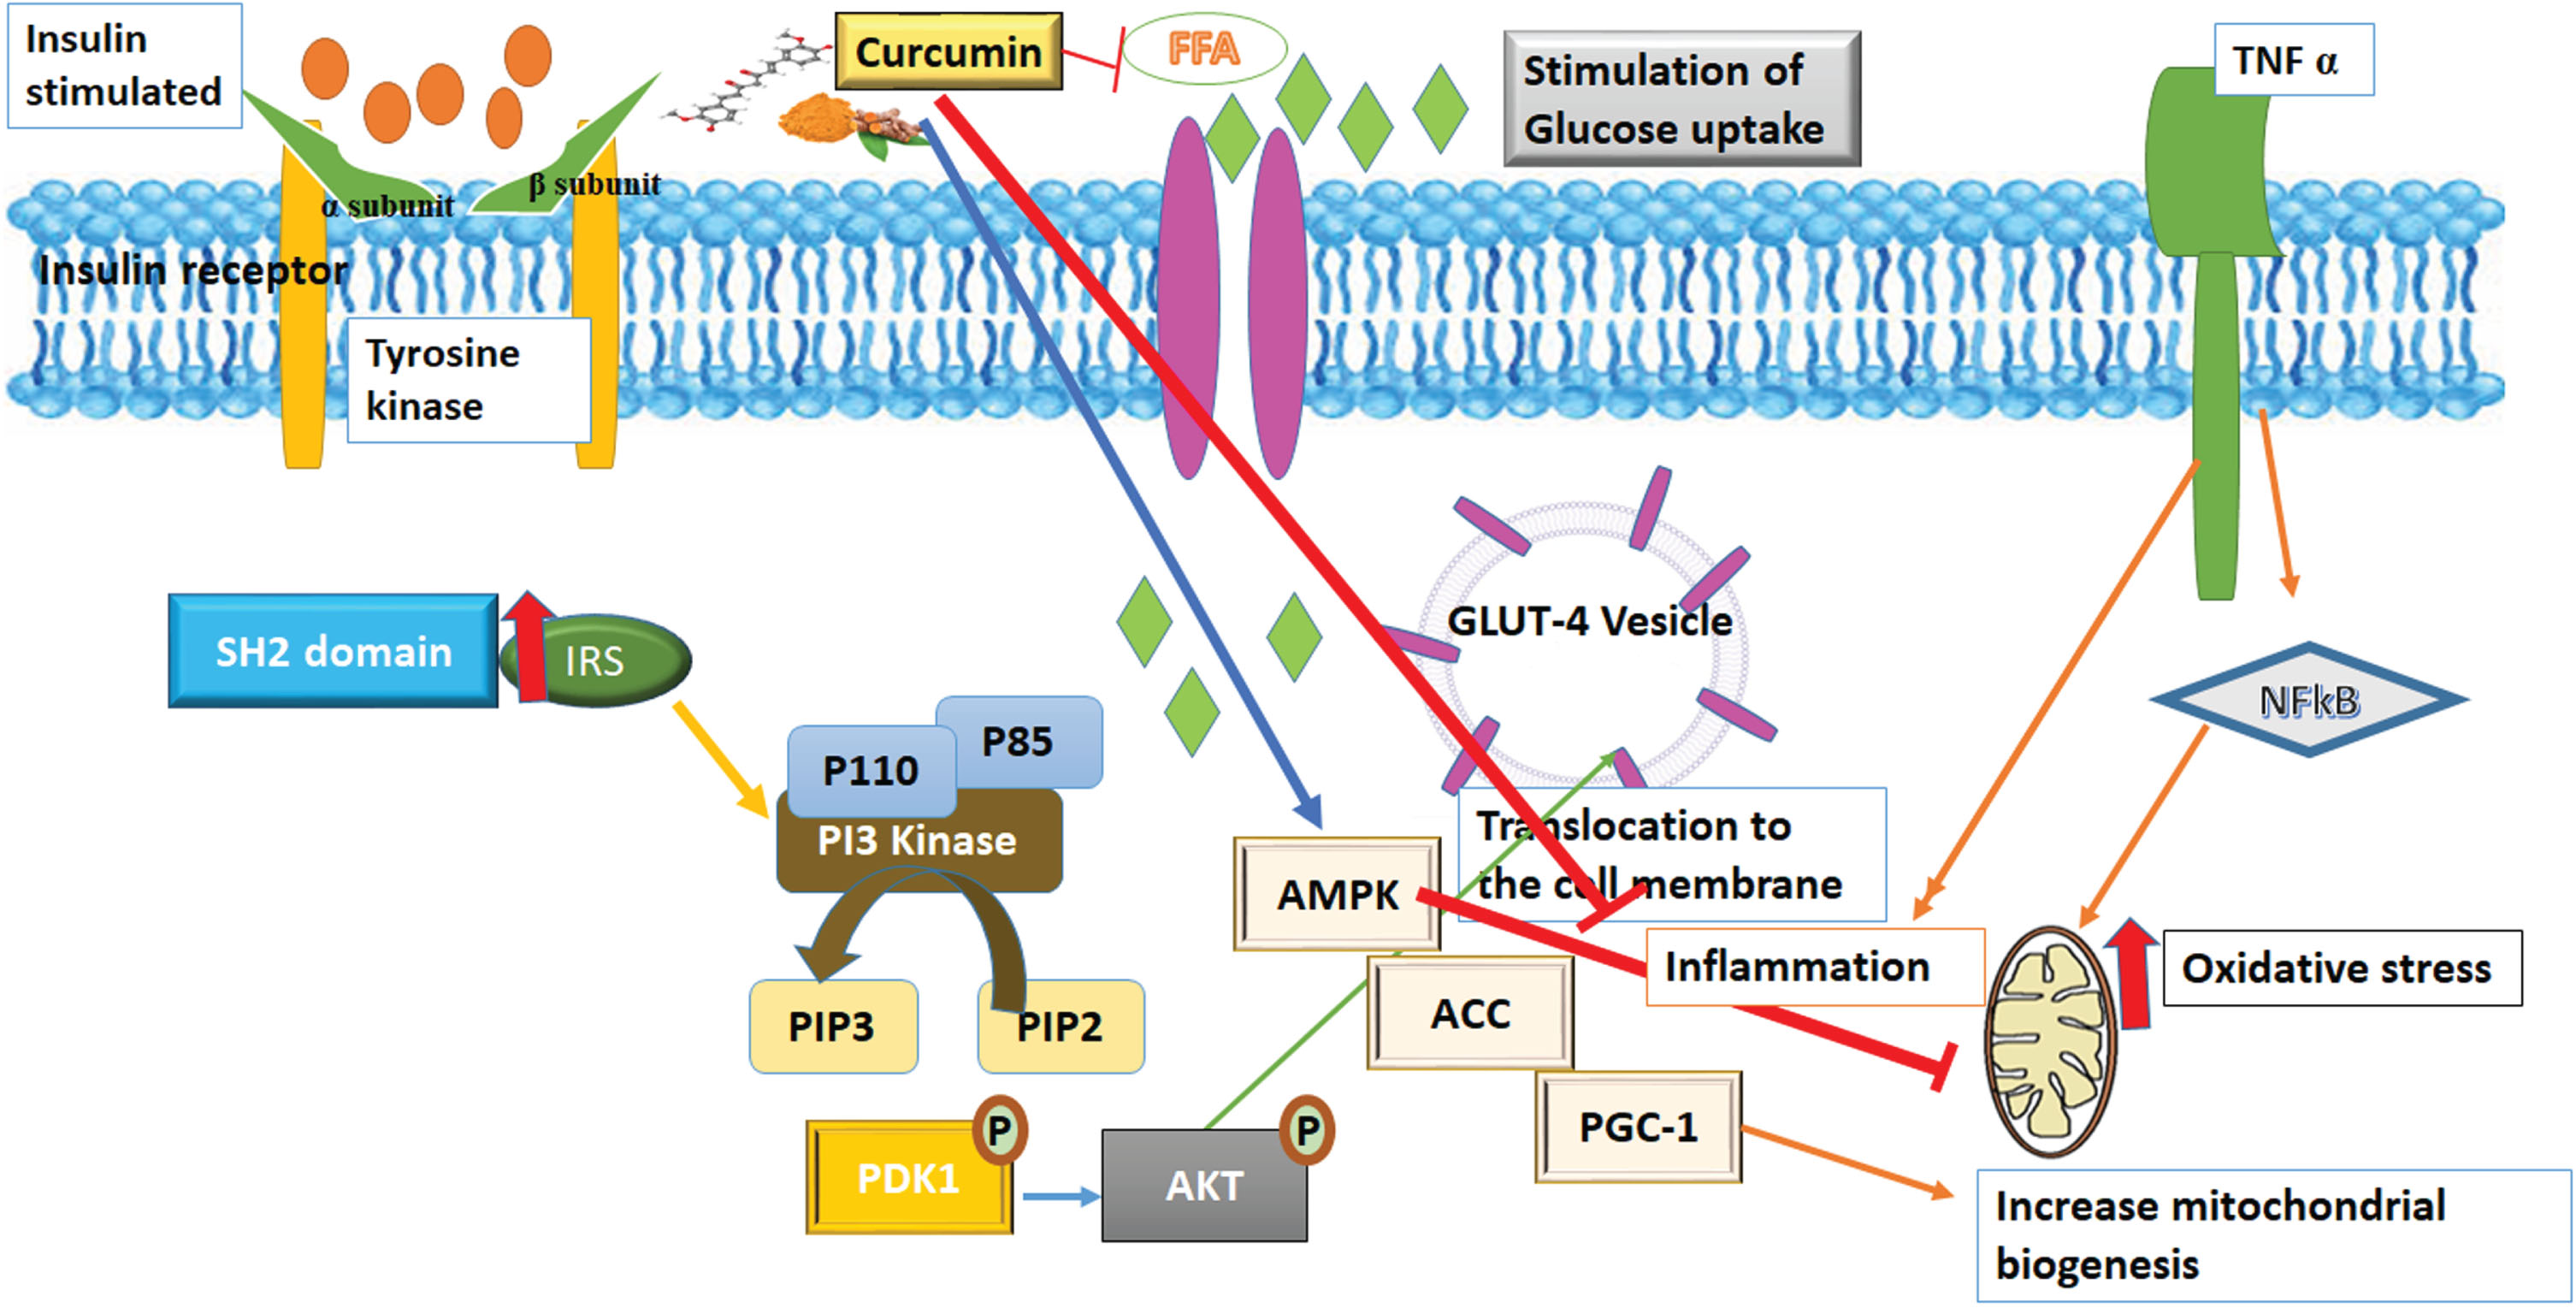 The pharmacological actions of curcumin on insulin receptor activation and glucose absorption. Protein kinase-B, Phosphatidylinositol-3,4,5-triphosphate and 4,5-bisphosphate (PIP3 & PIP2), respectively; Insulin receptor substrate 1 (IRS1), tumor necrosis factor (TNF), AMP-activated protein kinase (AMPK), Nuclear factor kappa-light-chain- activates B-cells (NF-kB), Peroxisome proliferator-activated receptor gamma co-activator 1 (PGC-1), Acetyl-CoA carboxylase (ACC) and for free fatty acids (FFAs).